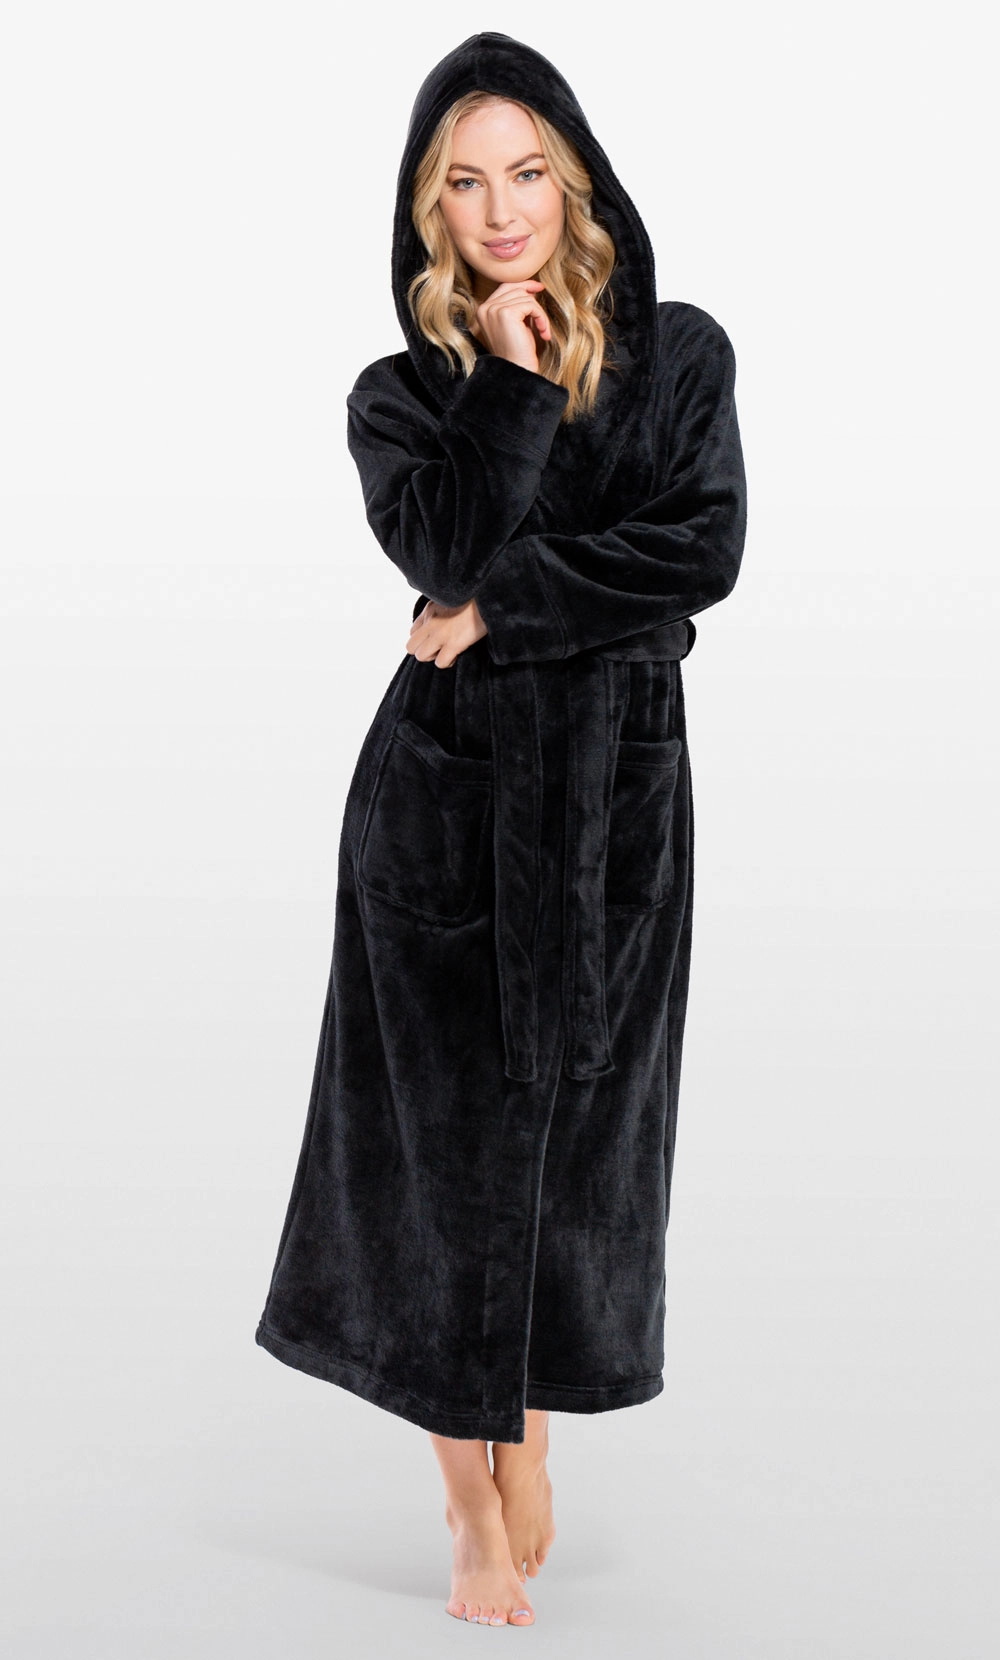 Luxury Bathrobes :: Plush Robes :: Super Soft Black Plush Hooded Women's  Robe - Wholesale bathrobes, Spa robes, Kids robes, Cotton robes, Spa  Slippers, Wholesale Towels